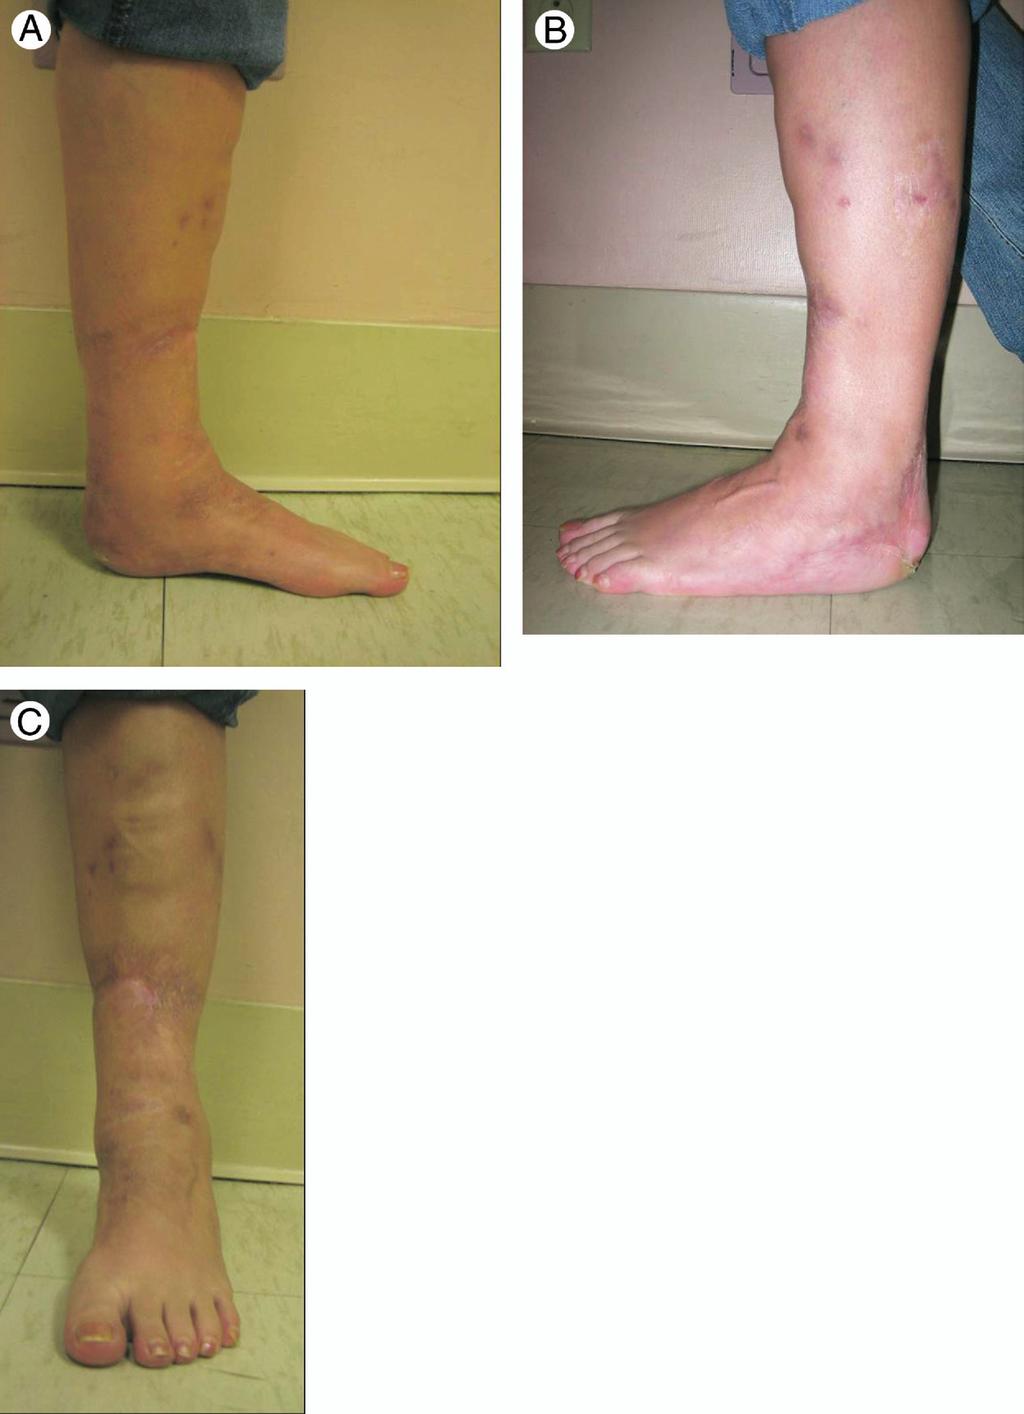 FIGURE 7 (A, B, C) Photographs of the patient at final follow-up shows the foot in